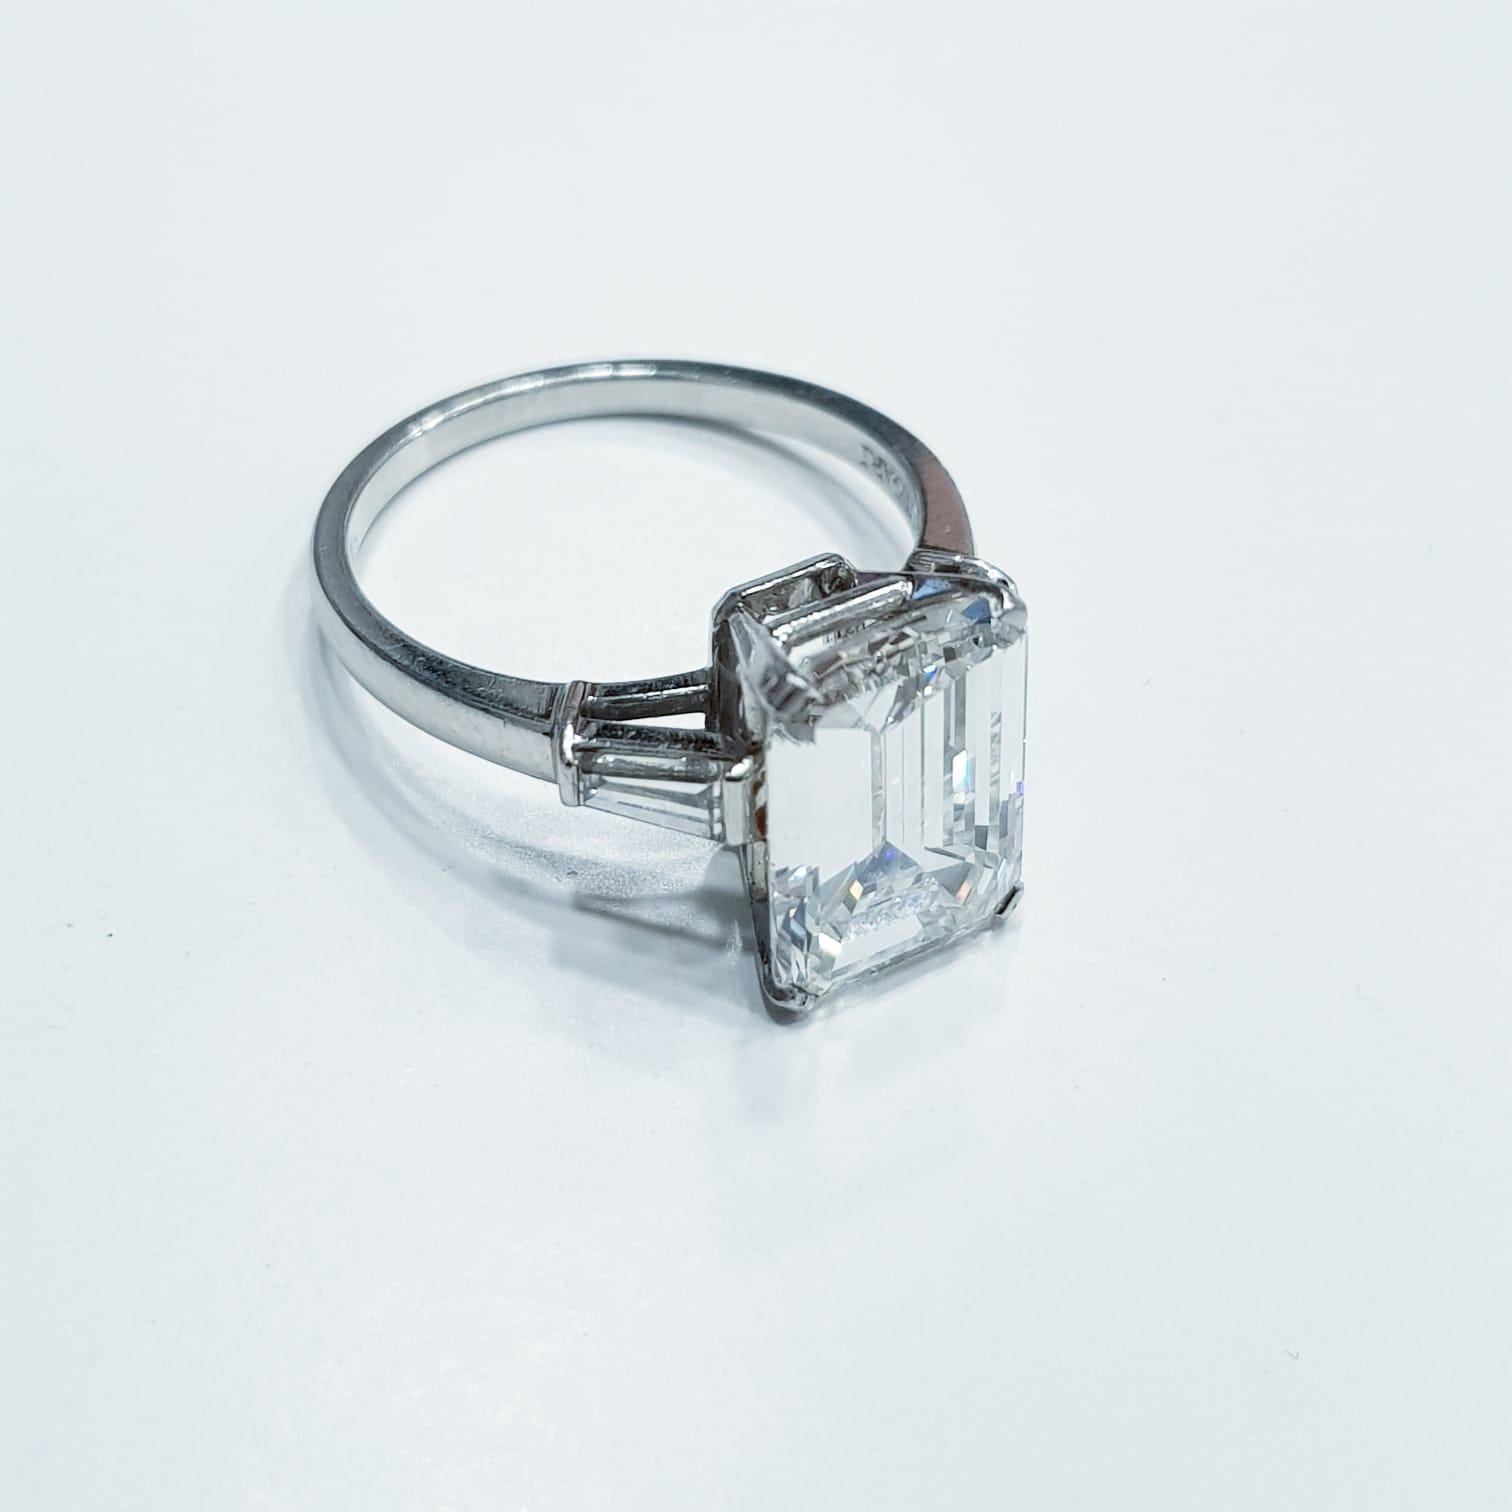 Elegant, high quality, and quite substantial 2.50ct emerald cut diamond has excellent VS2 clarity, beautiful white color, and a bright, lively, sophisticated cut! The diamond is certified by GIA Under GIA rigorous standards, the diamond received a